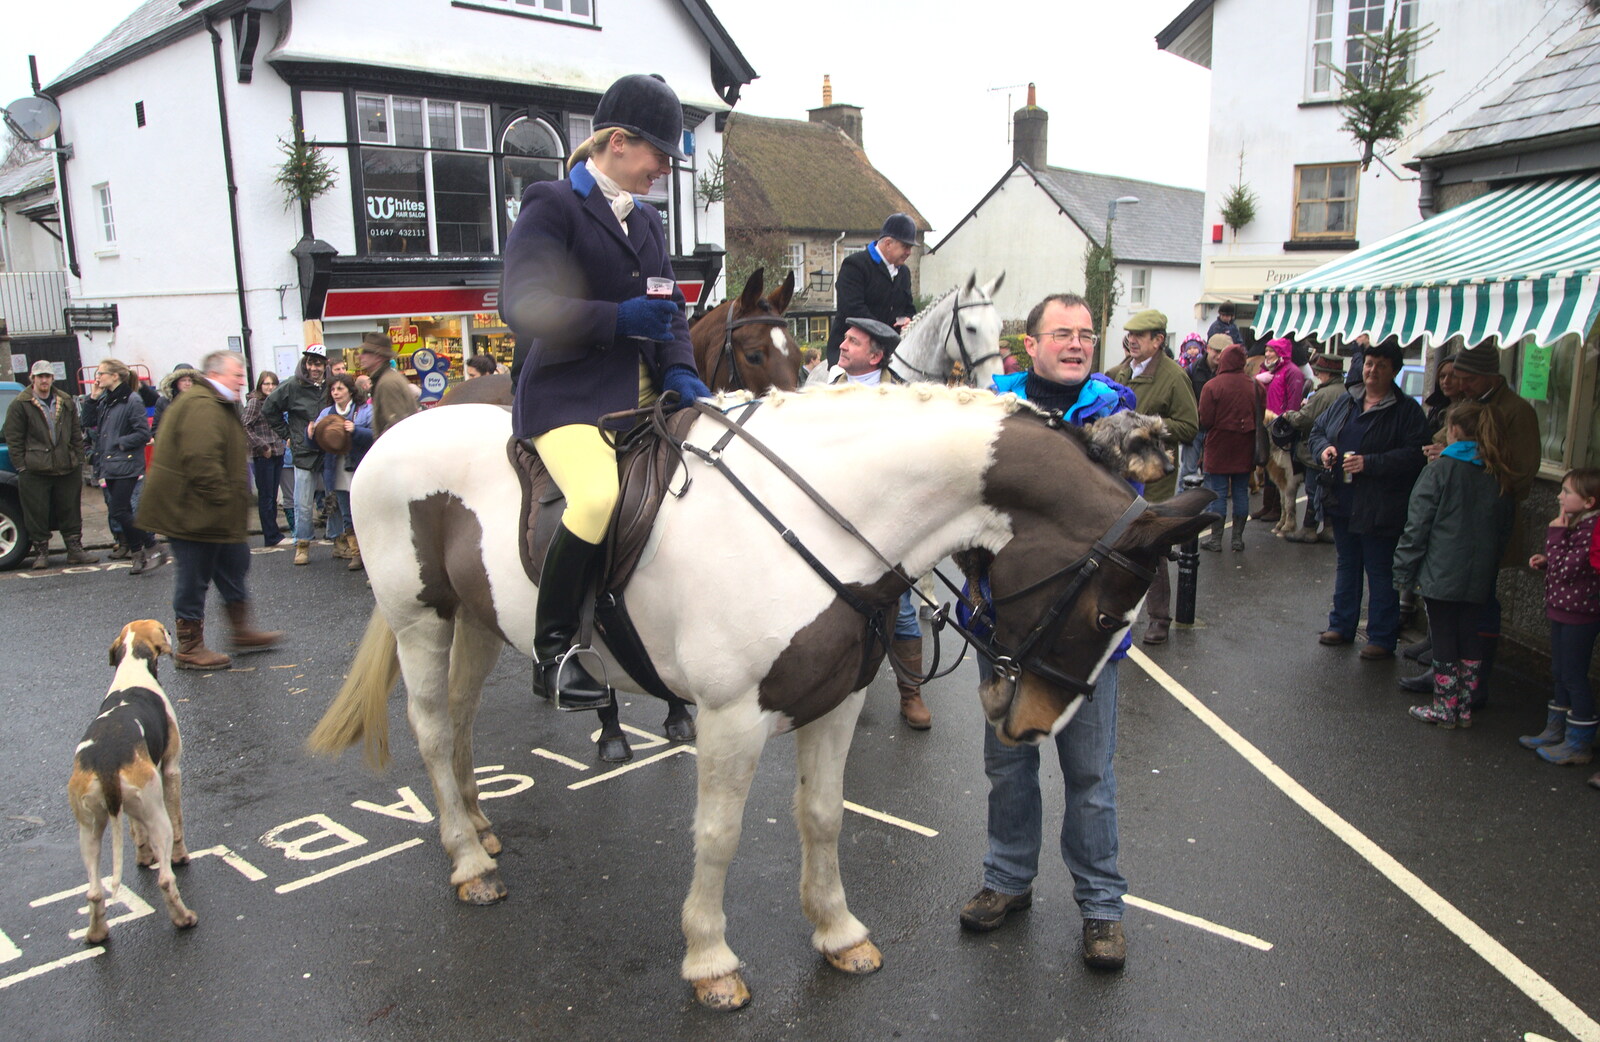 Another rider appears from The Boxing Day Hunt, Chagford, Devon - 26th December 2012